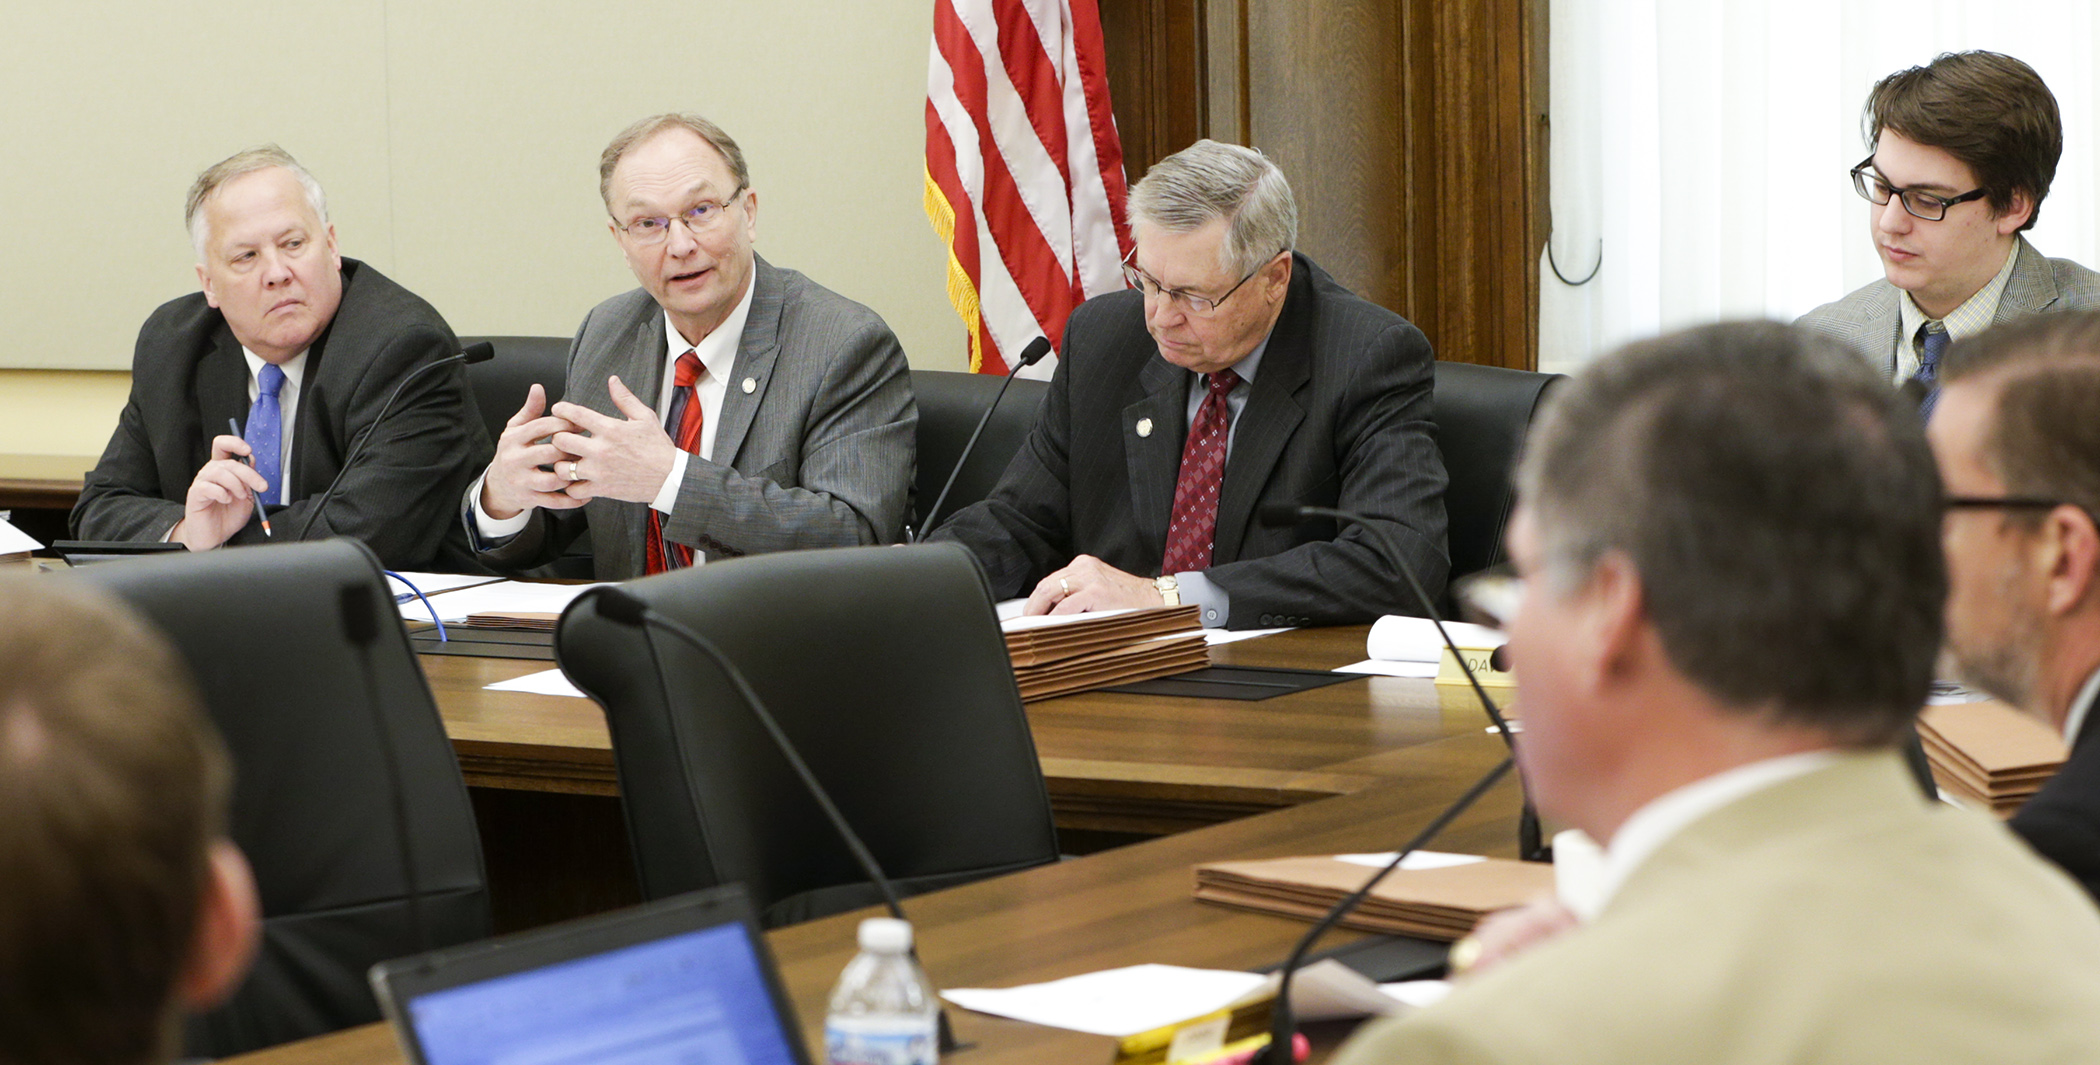 Rep. Paul Torkelson comments on his amendment during the conference committee on SF3133, the Minnesota licensing and registration system, or MNLARS, funding bill March 22. Photo by Paul Battaglia